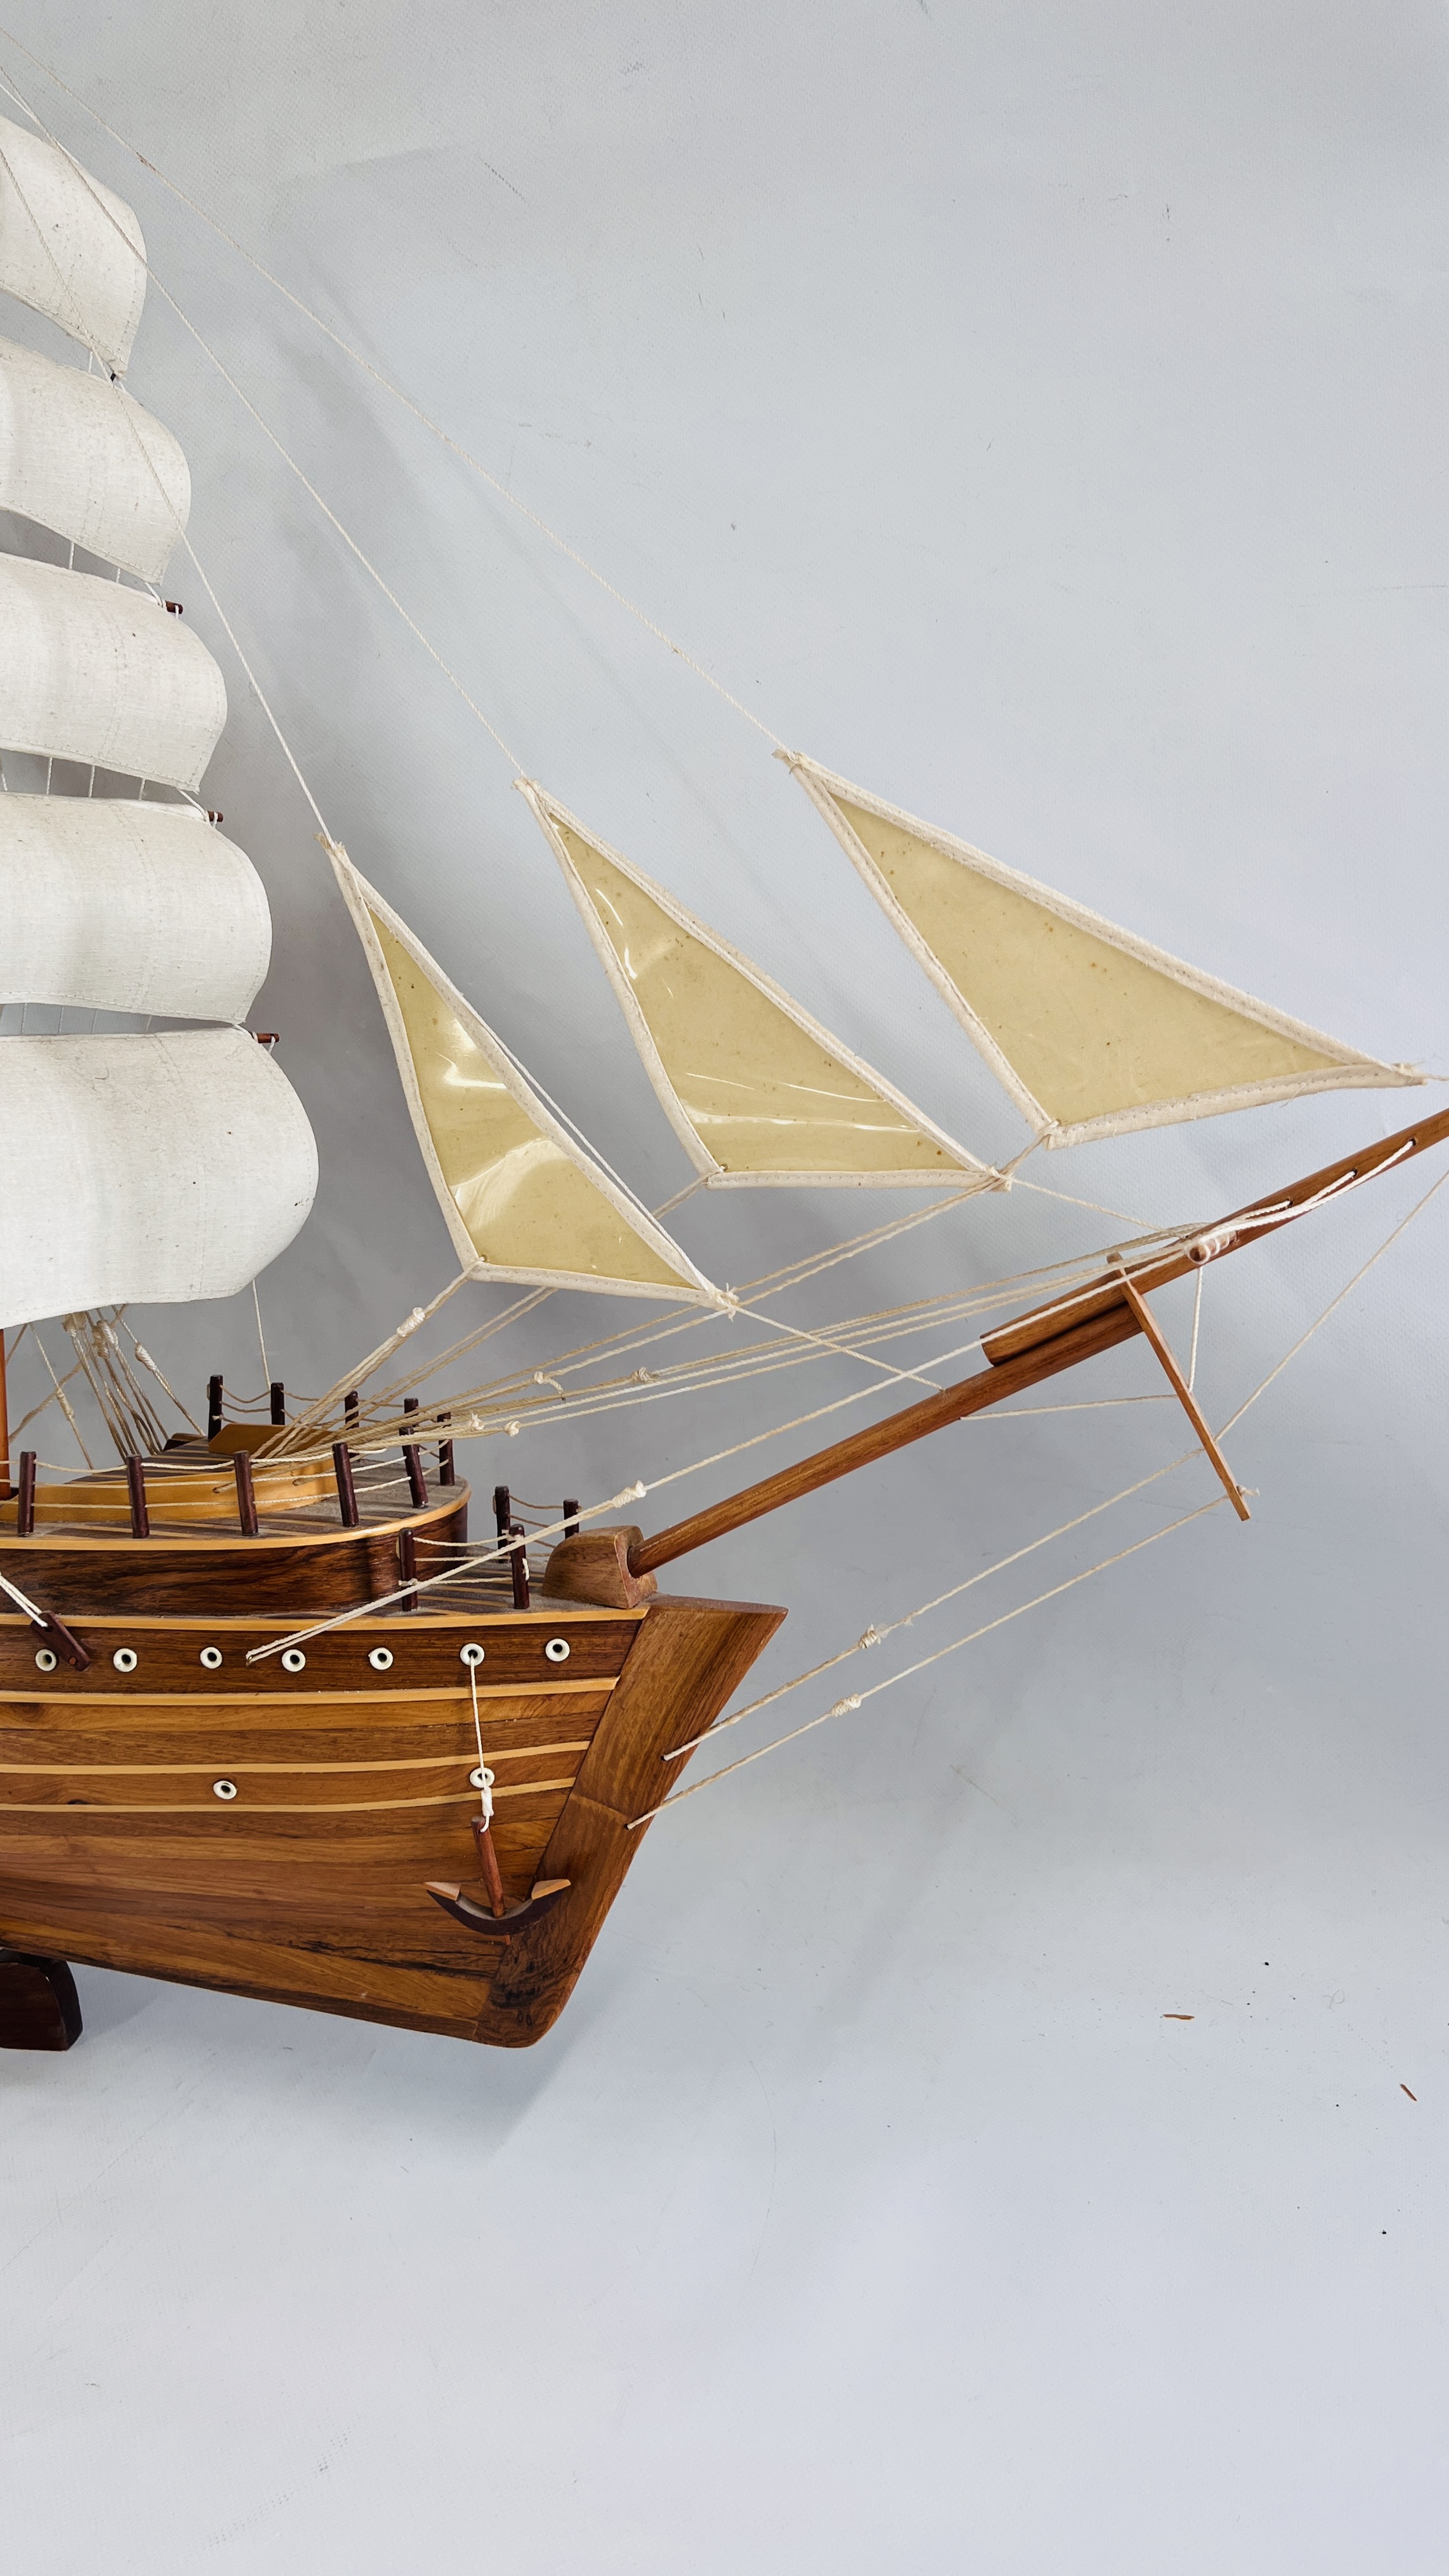 A LARGE WOODEN MODEL OF A SHIP L 110 CM. X H 85CM. - Image 4 of 10